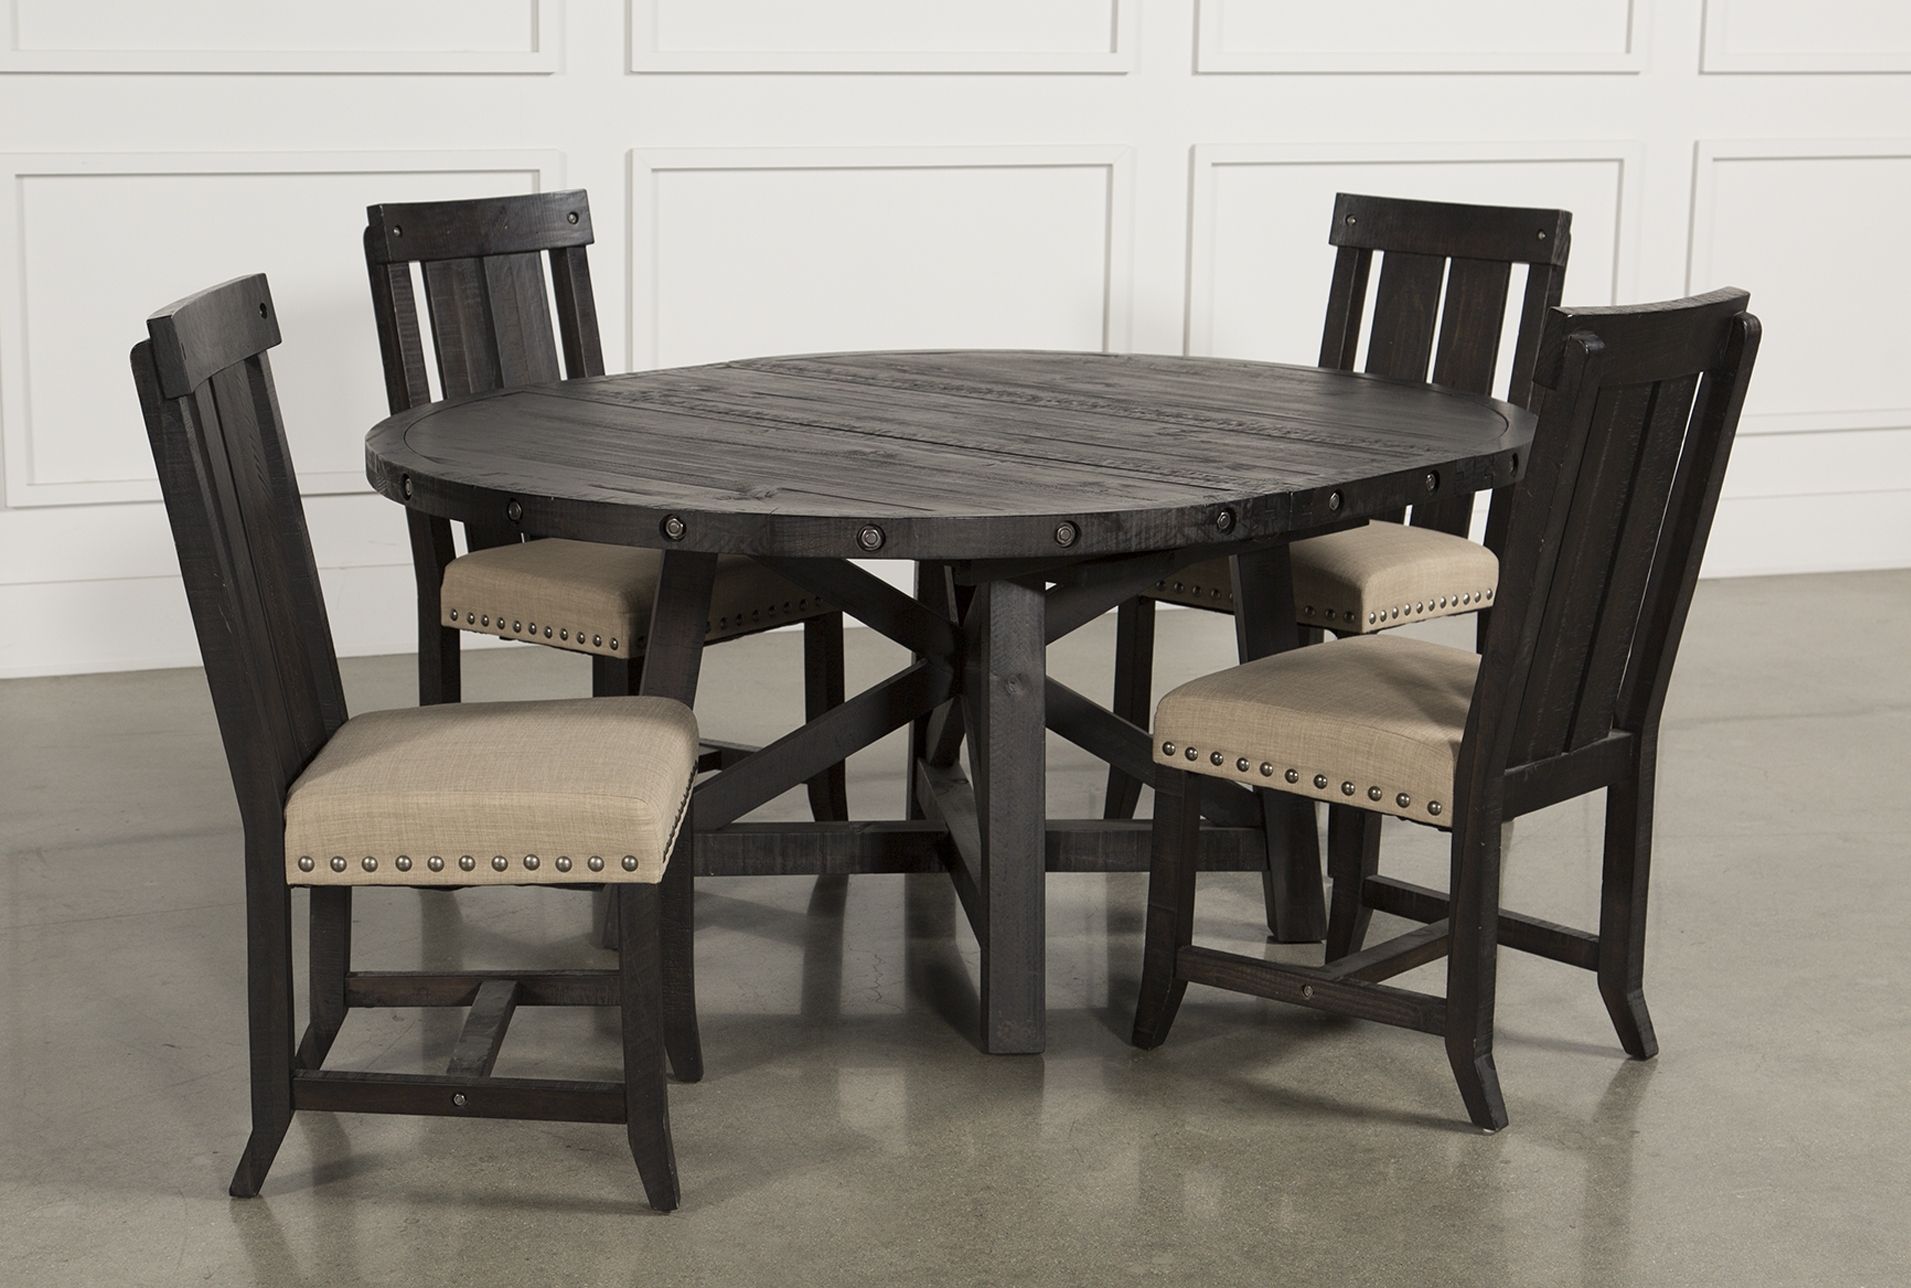 Jaxon 5 Piece Extension Round Dining Set W/wood Chairs | Products Throughout Latest Jaxon Grey Round Extension Dining Tables (View 4 of 20)